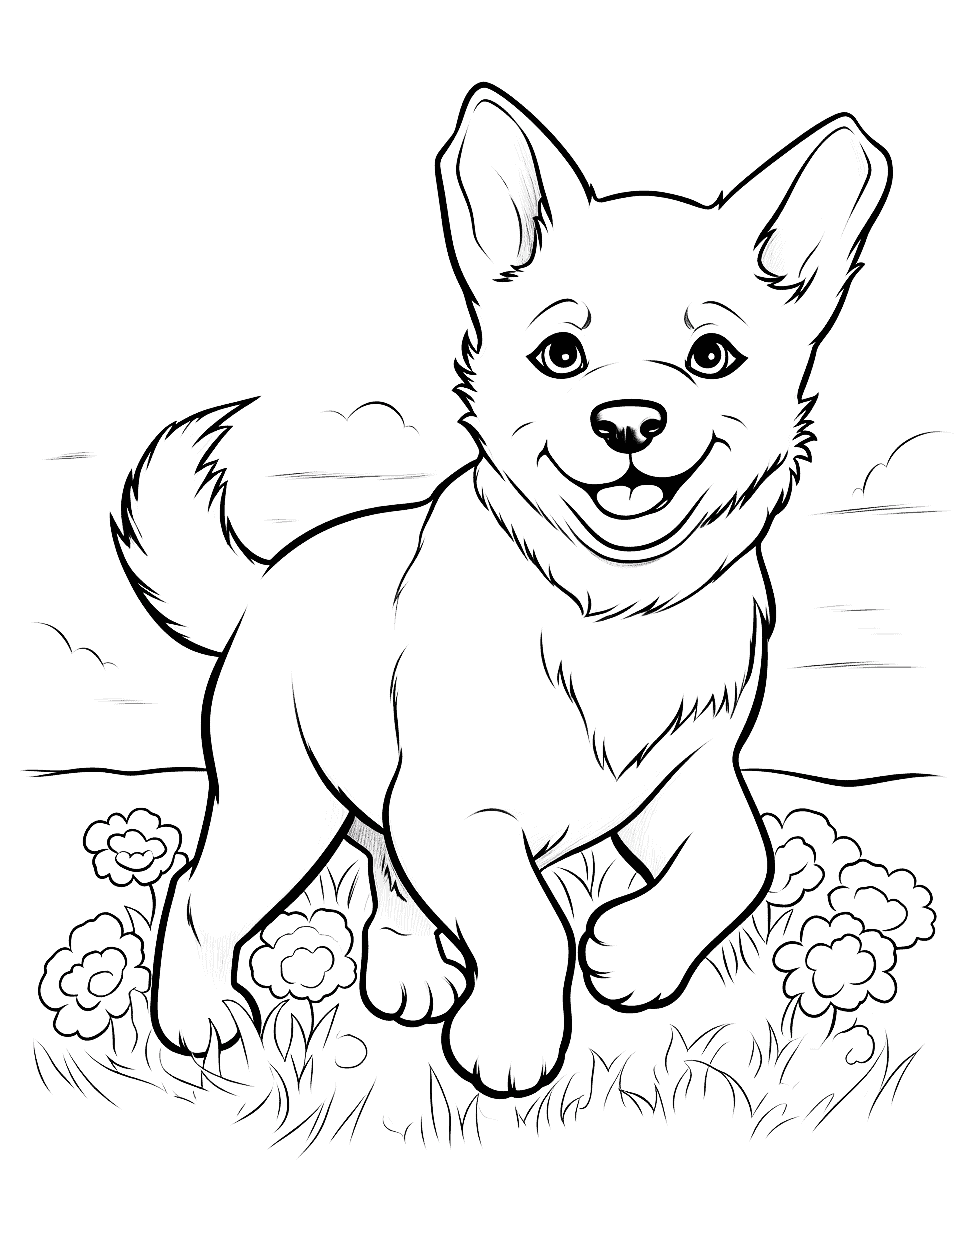 Springtime Joy Husky in a Flower Field Puppy Coloring Page - A Husky puppy joyfully running through a field of blooming flowers.